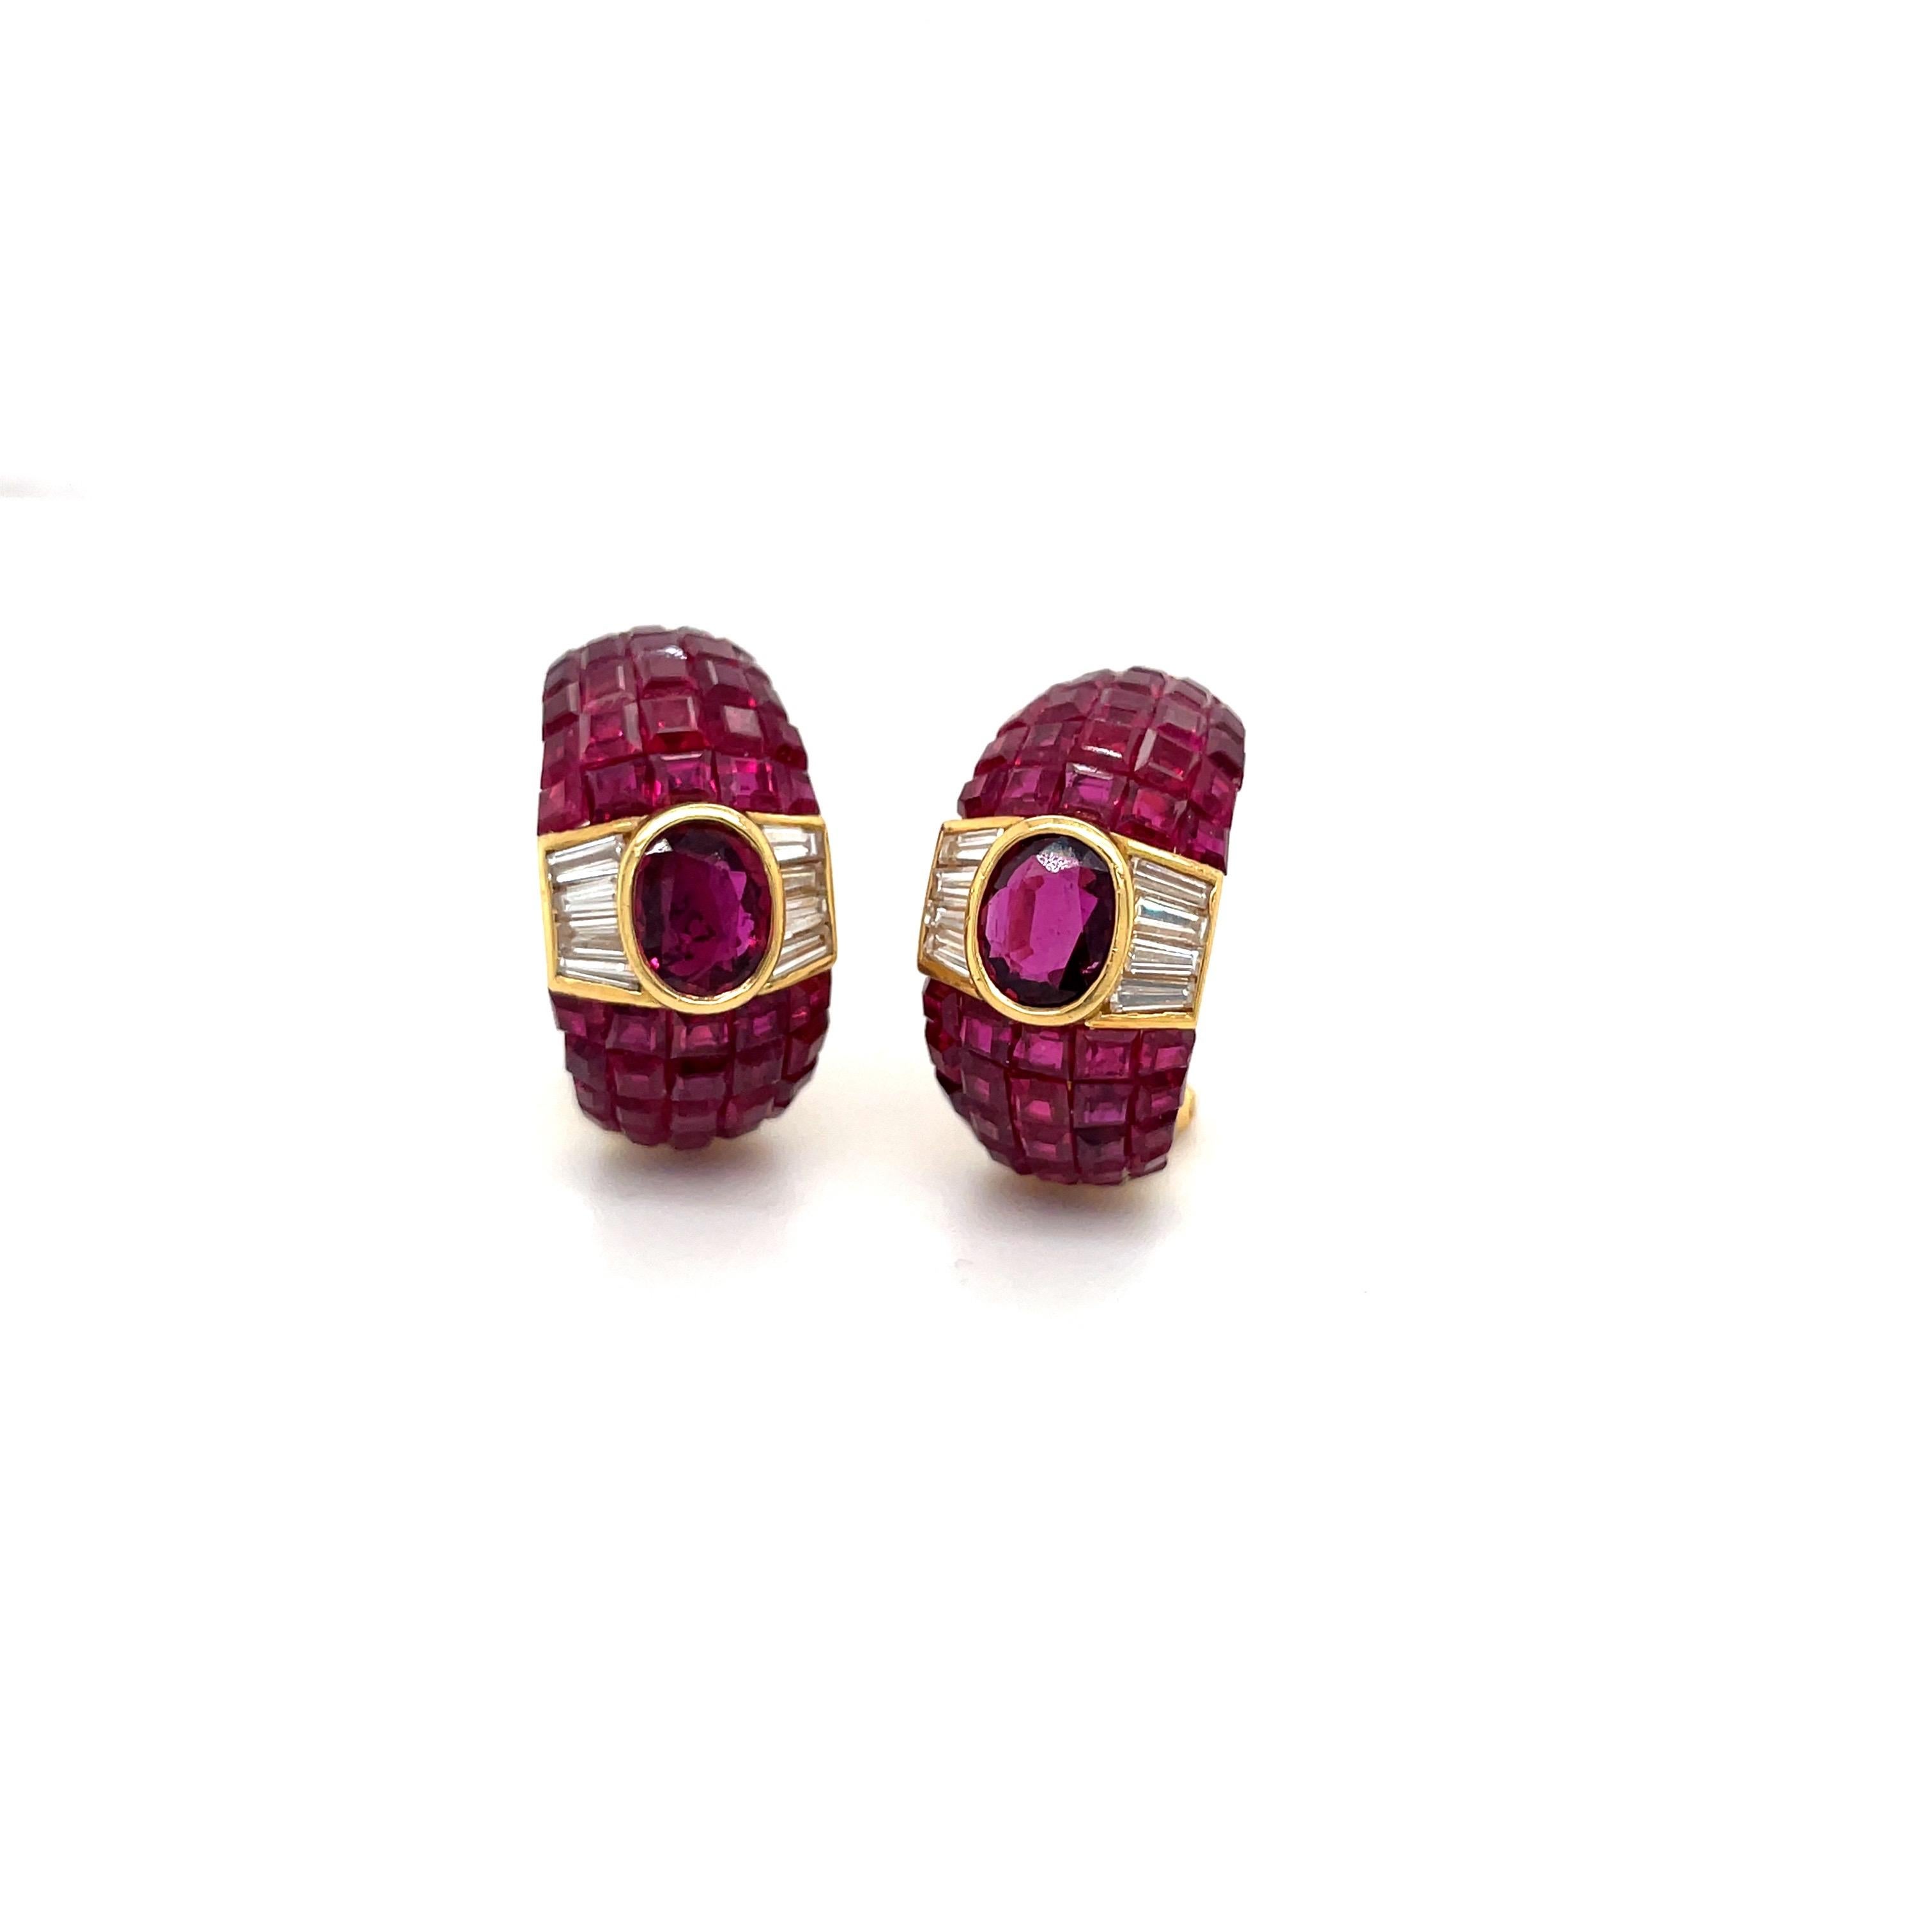 Magnificent 18 karat yellow gold, ruby and diamond half hoop earrings. These stunning earrings center oval bezel set rubies. Tapered diamond baguettes flank the center rubies.The balance of the hoop shaped earrings are set with square invisibly set